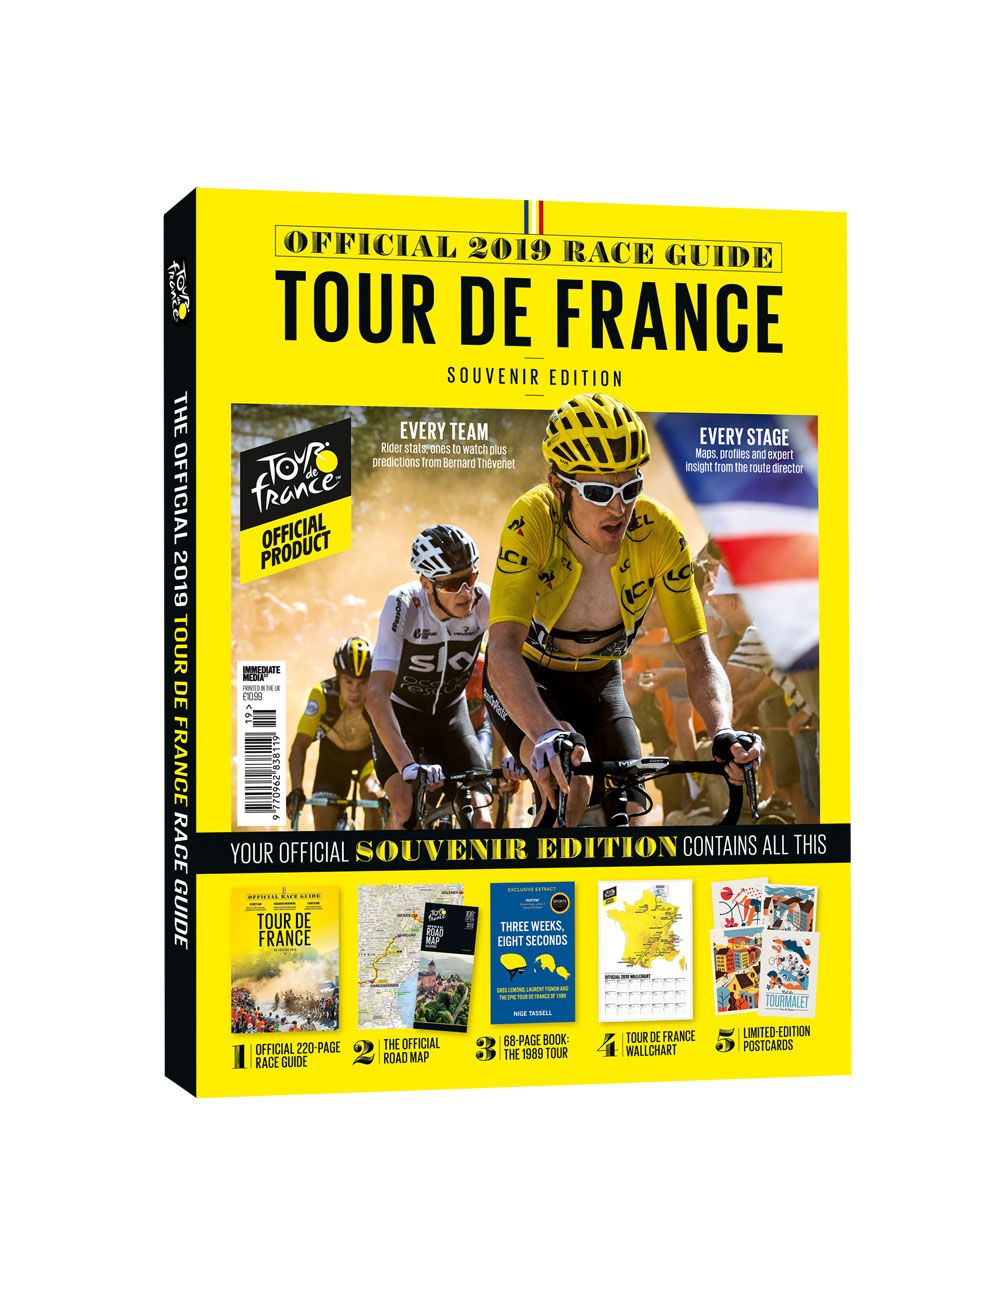 Official Tour de France Race Guide 2019 is available to preorder now